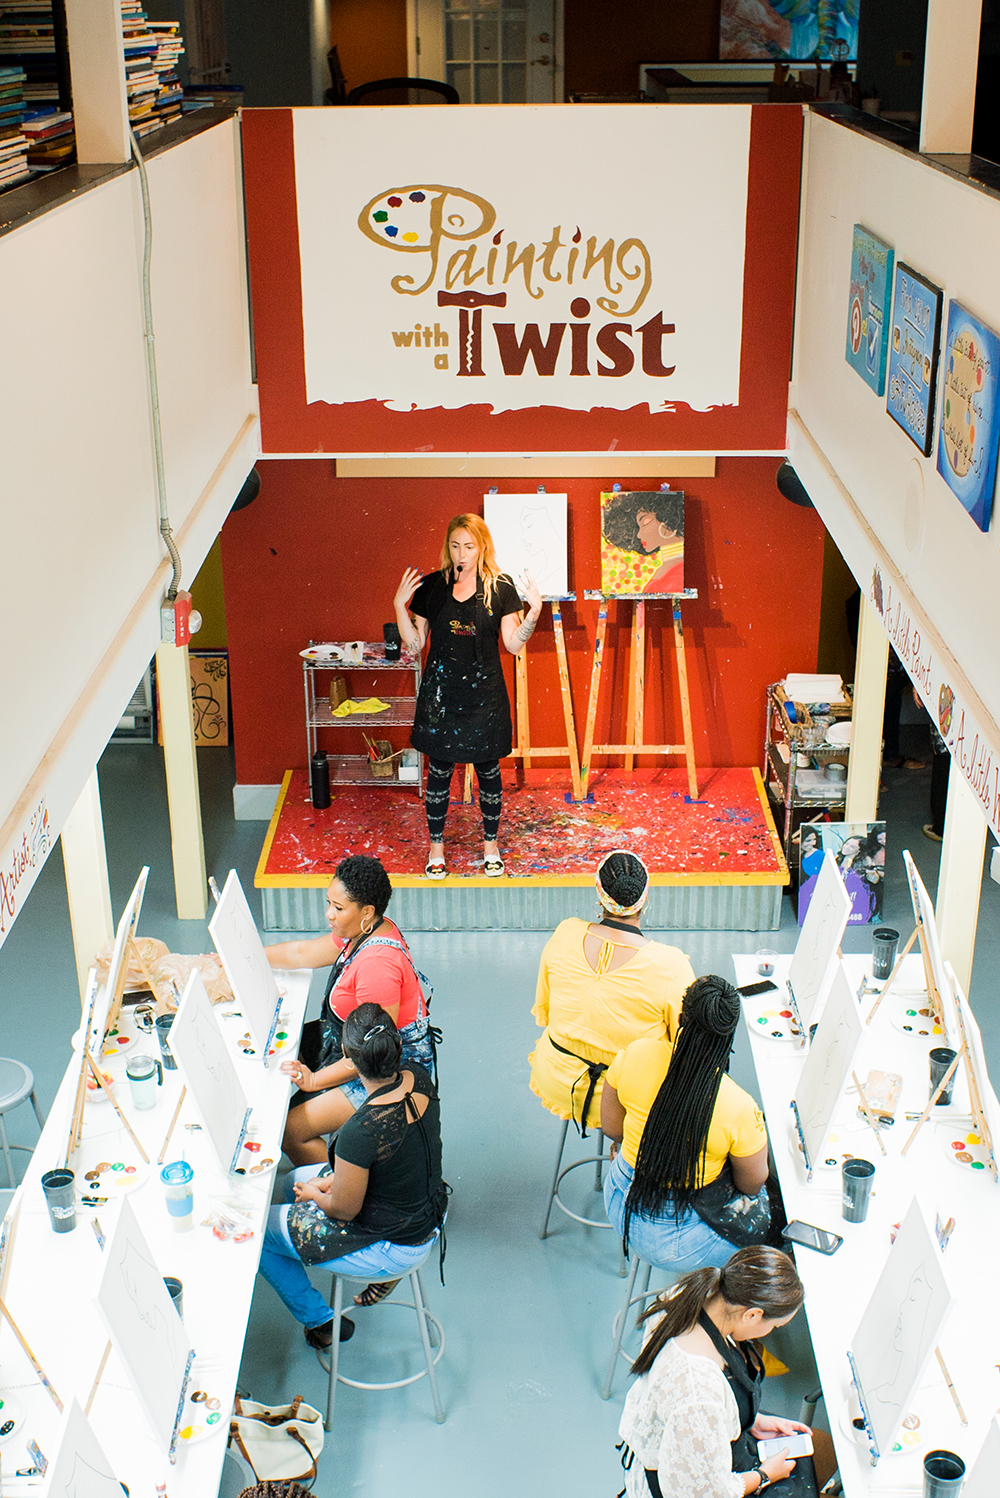 Painting With a Twist is located at 2527 Central Ave. Photo by Kristina Holman.